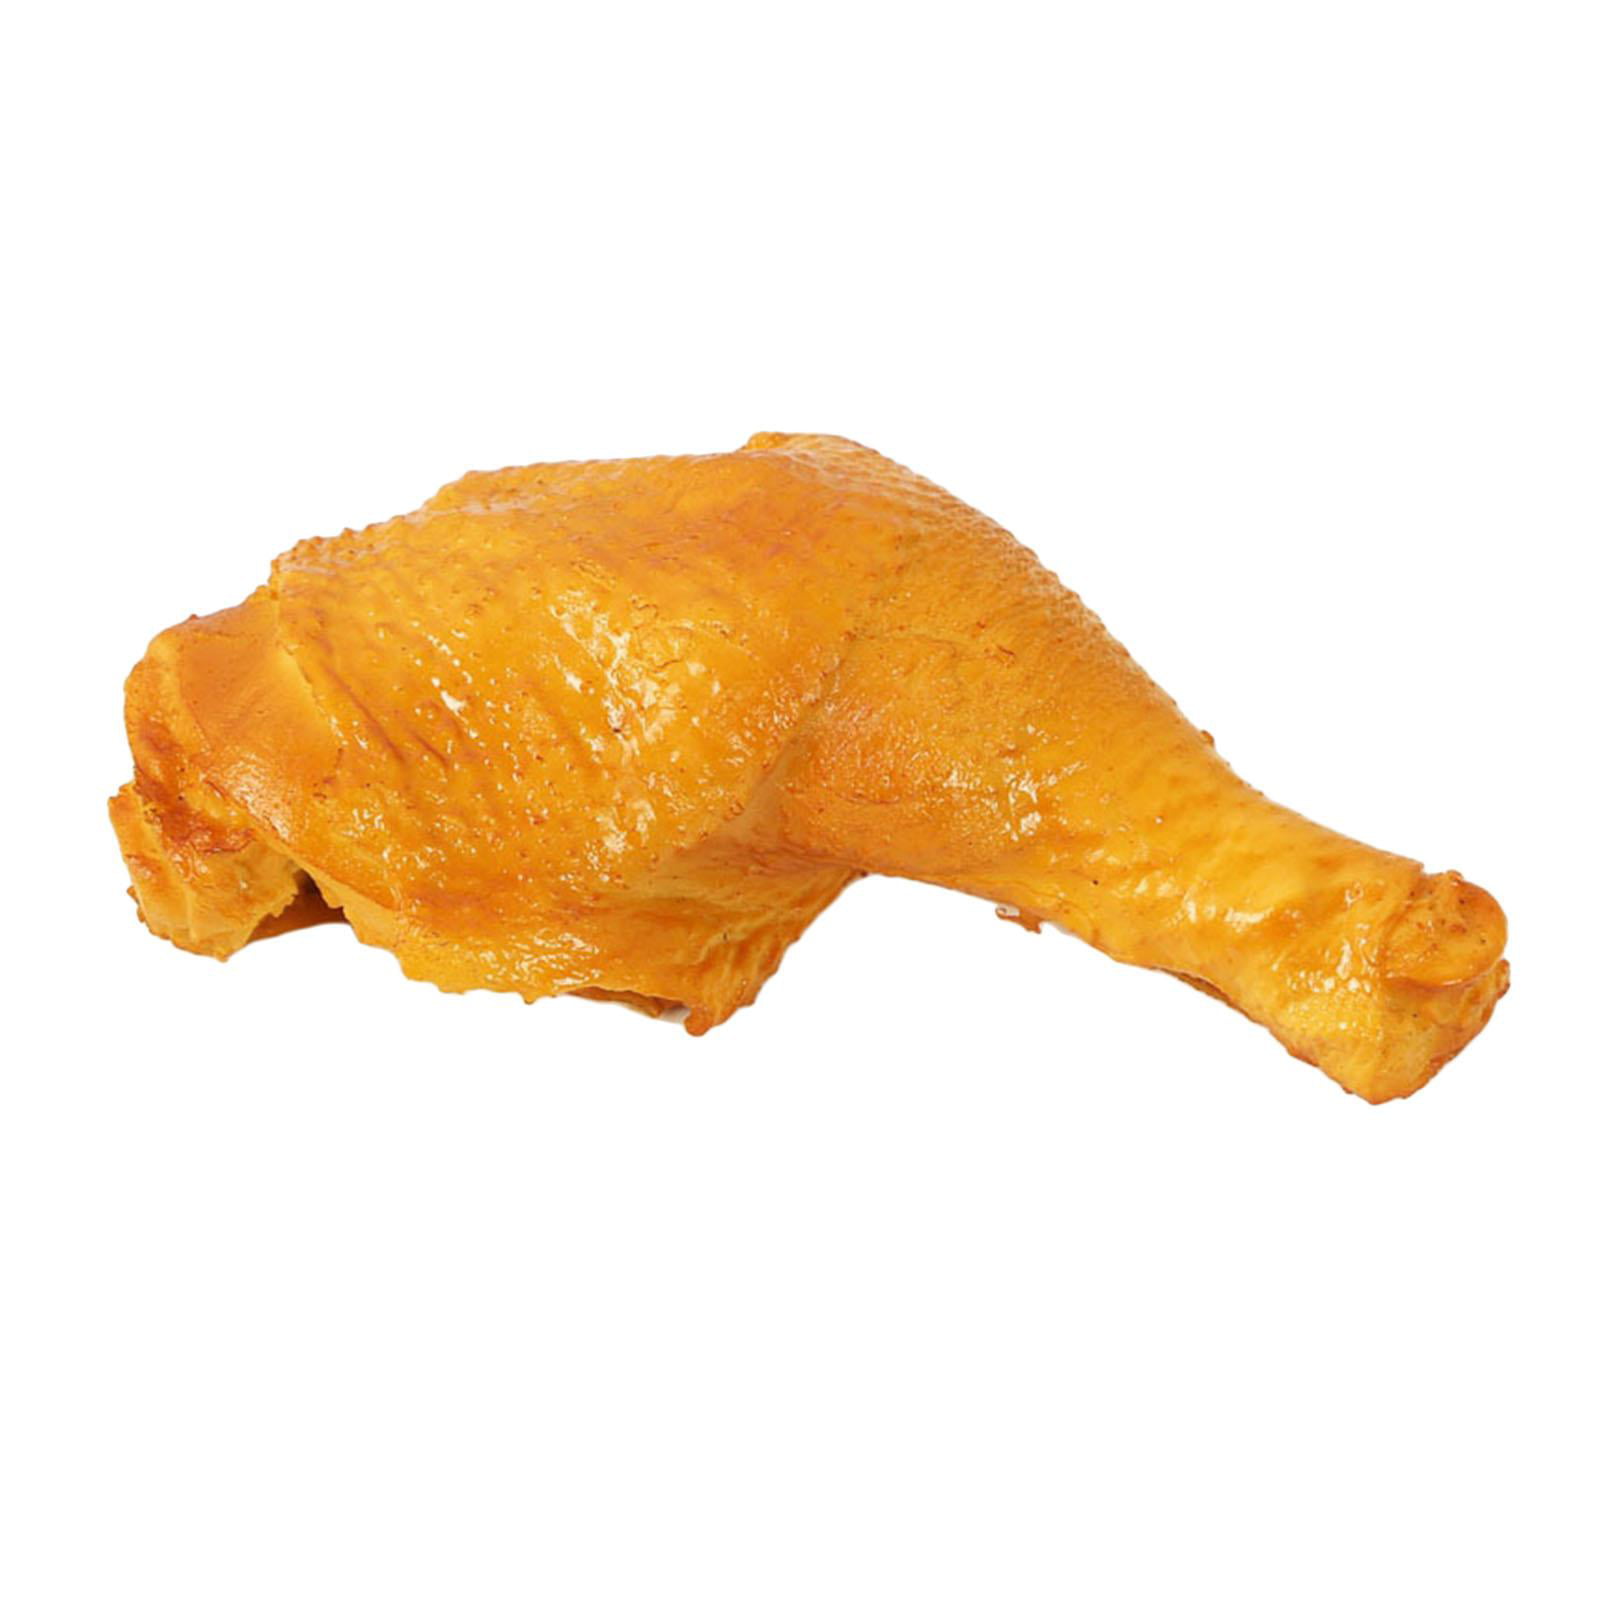 Realistic Simulation Chicken, Artificial Lifelike Meat Model Ornaments ...